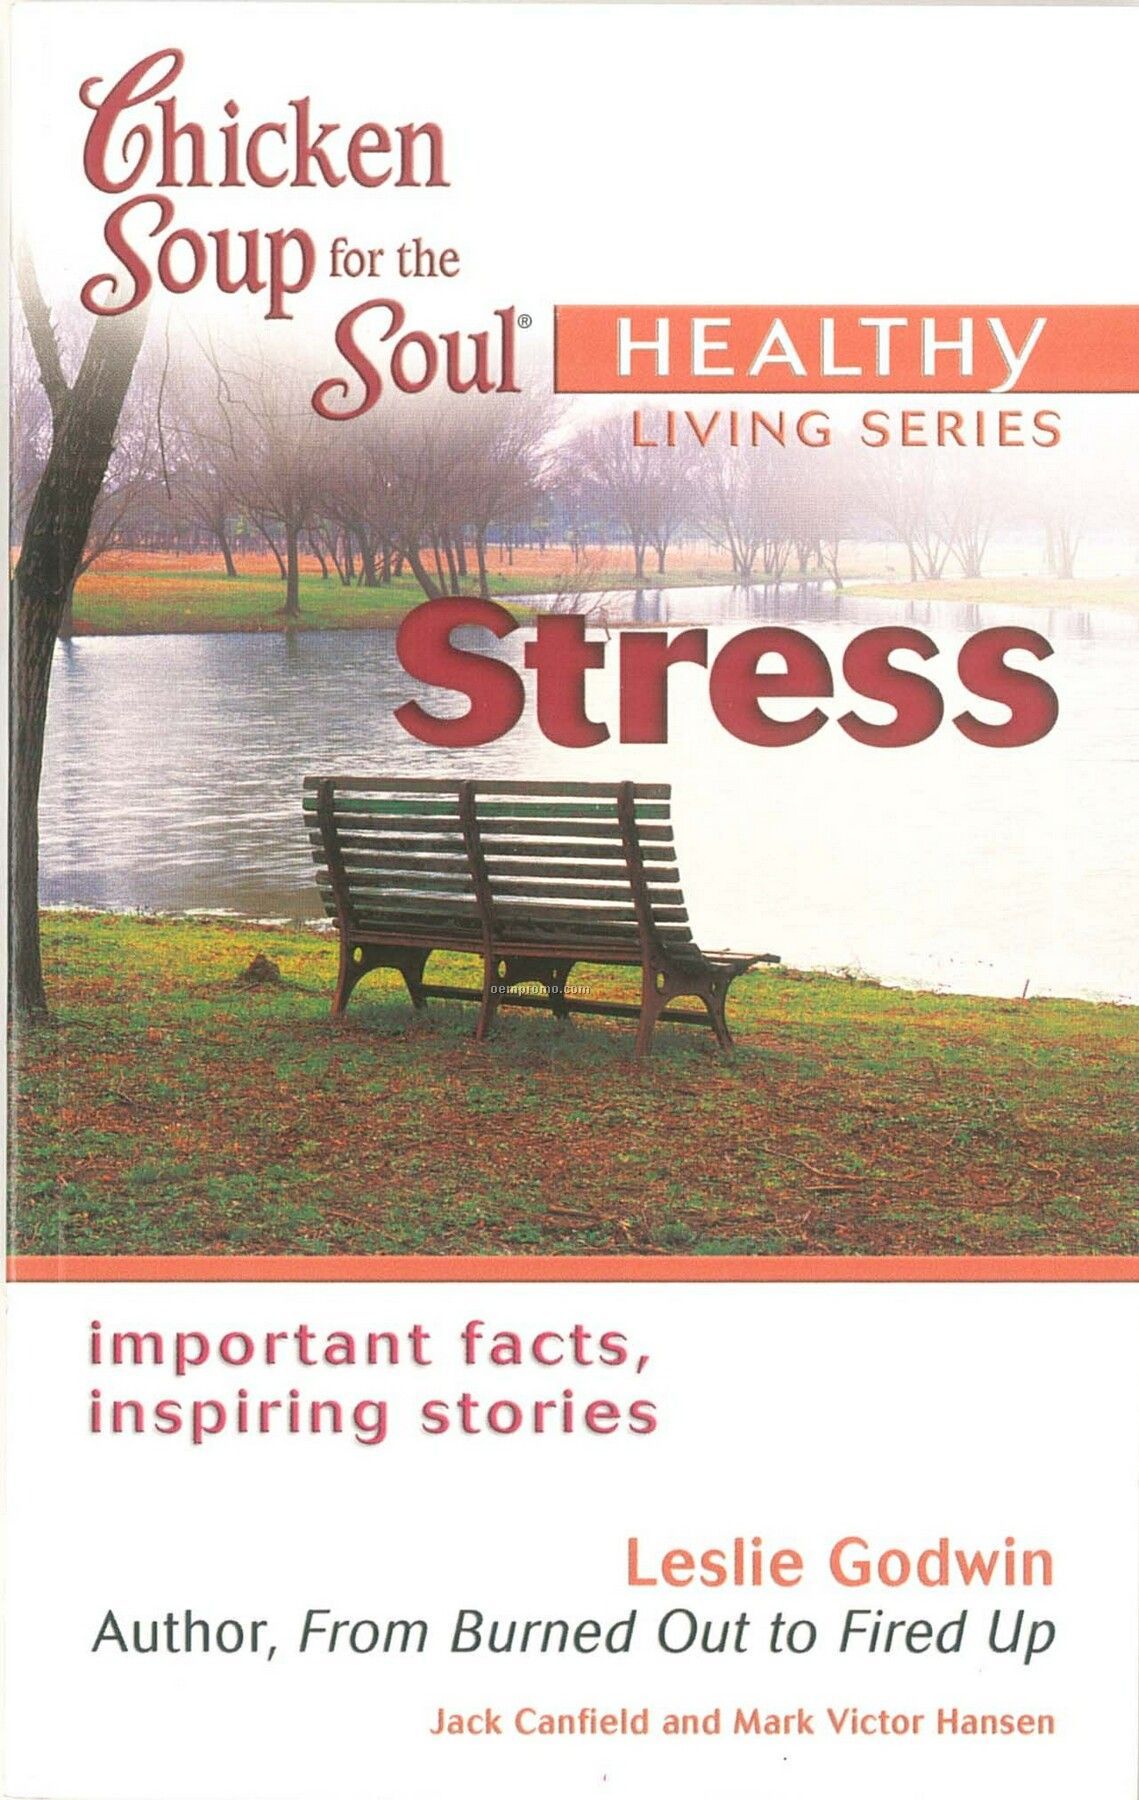 Chicken Soup For The Soul - Healthy Living Series - Stress